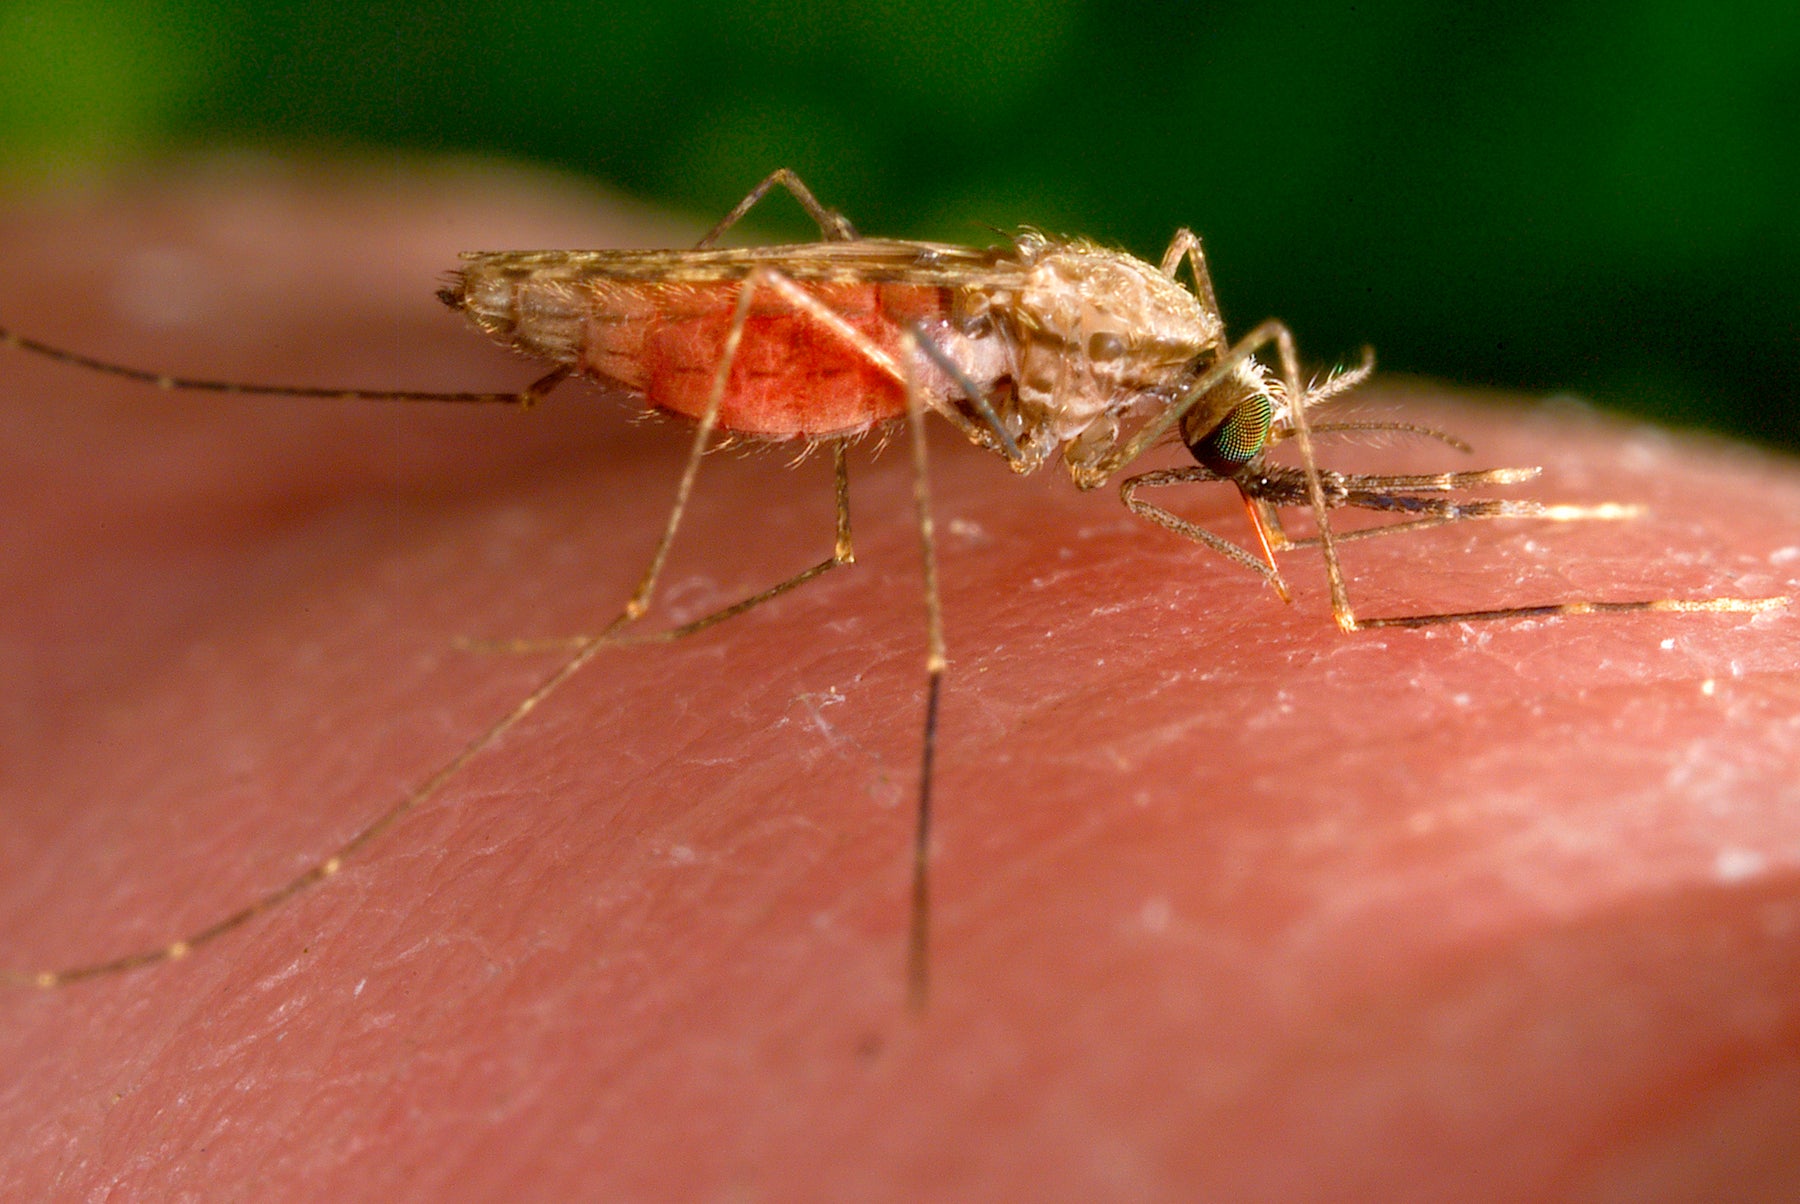 A mosquito on a person's finger.